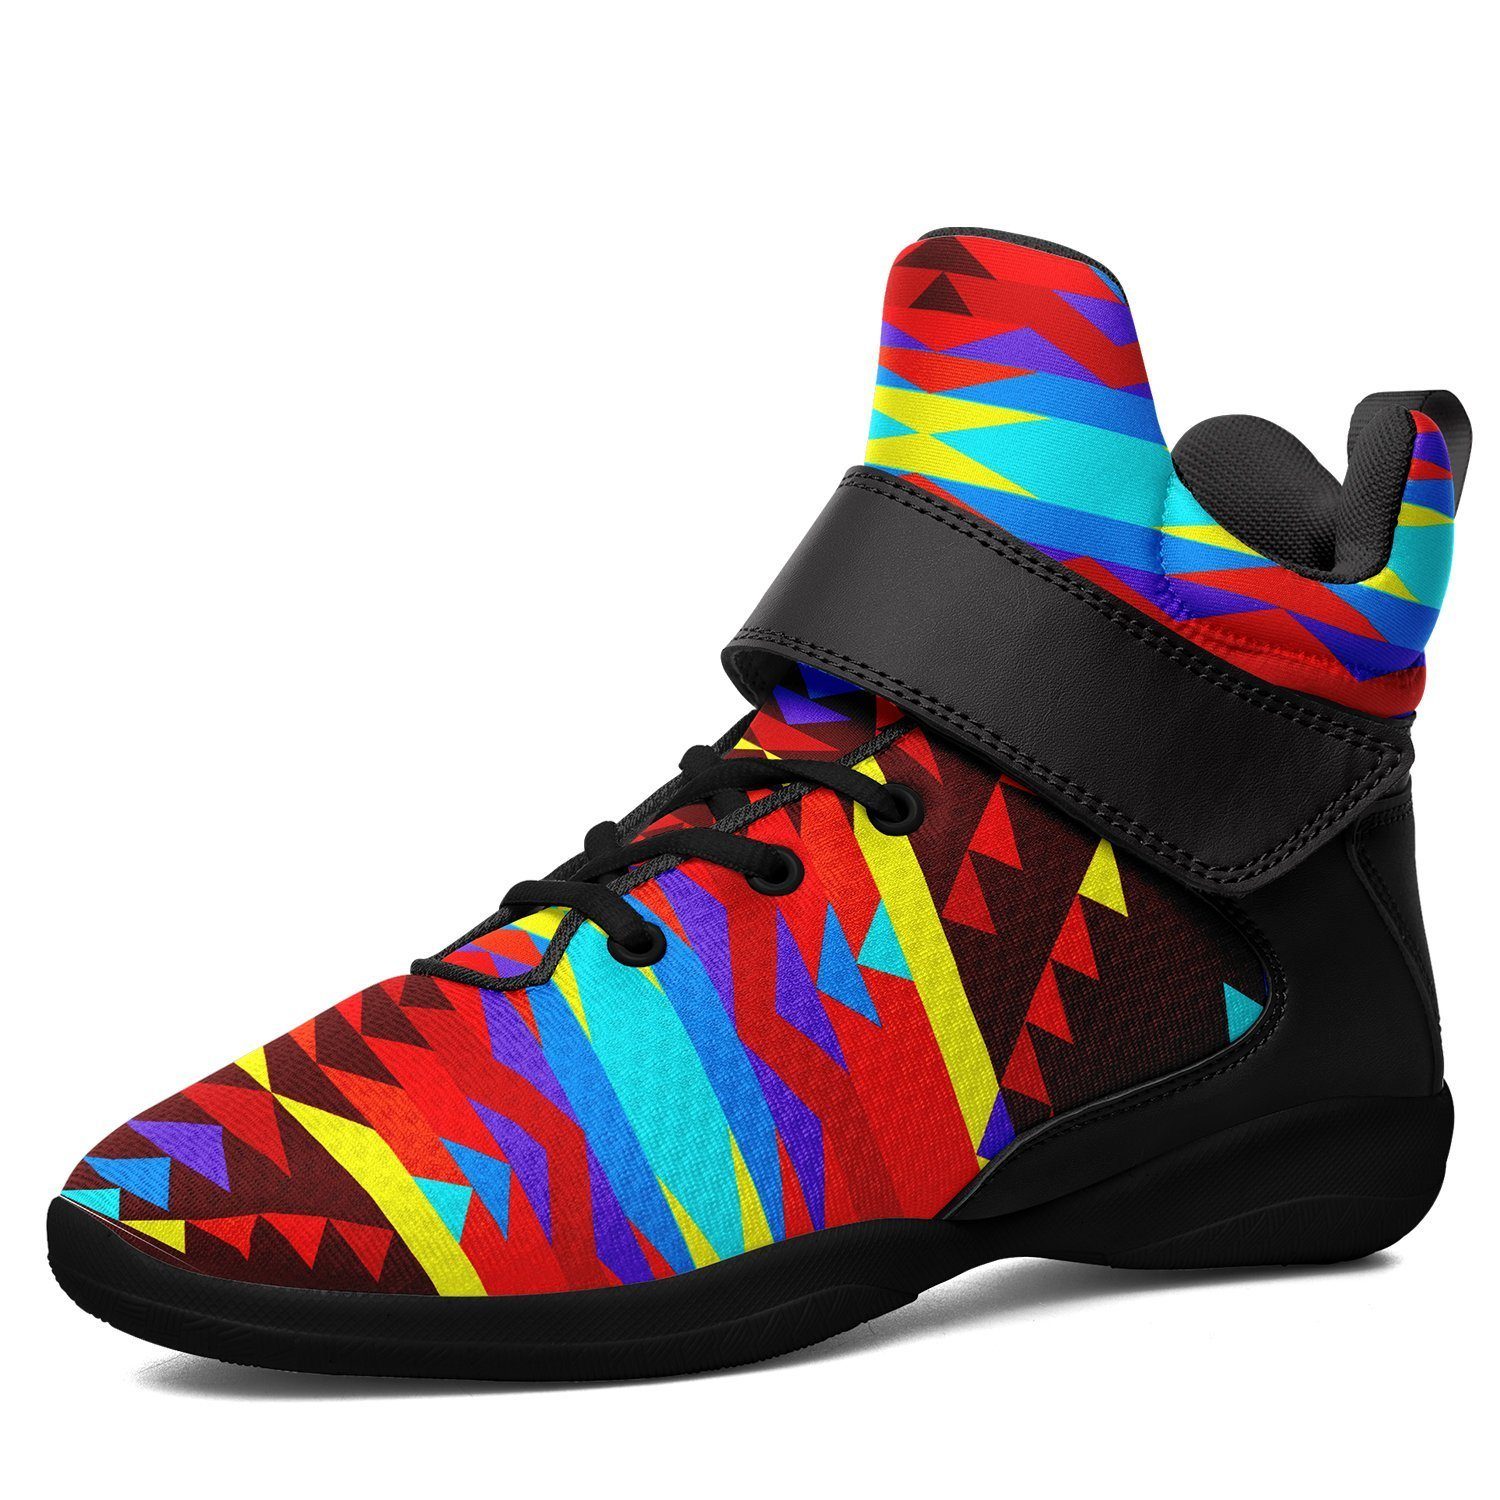 Visions of Lasting Peace Ipottaa Basketball / Sport High Top Shoes -Black Sole 49 Dzine US Men 7 / EUR 40 Black Sole with Black Strap 